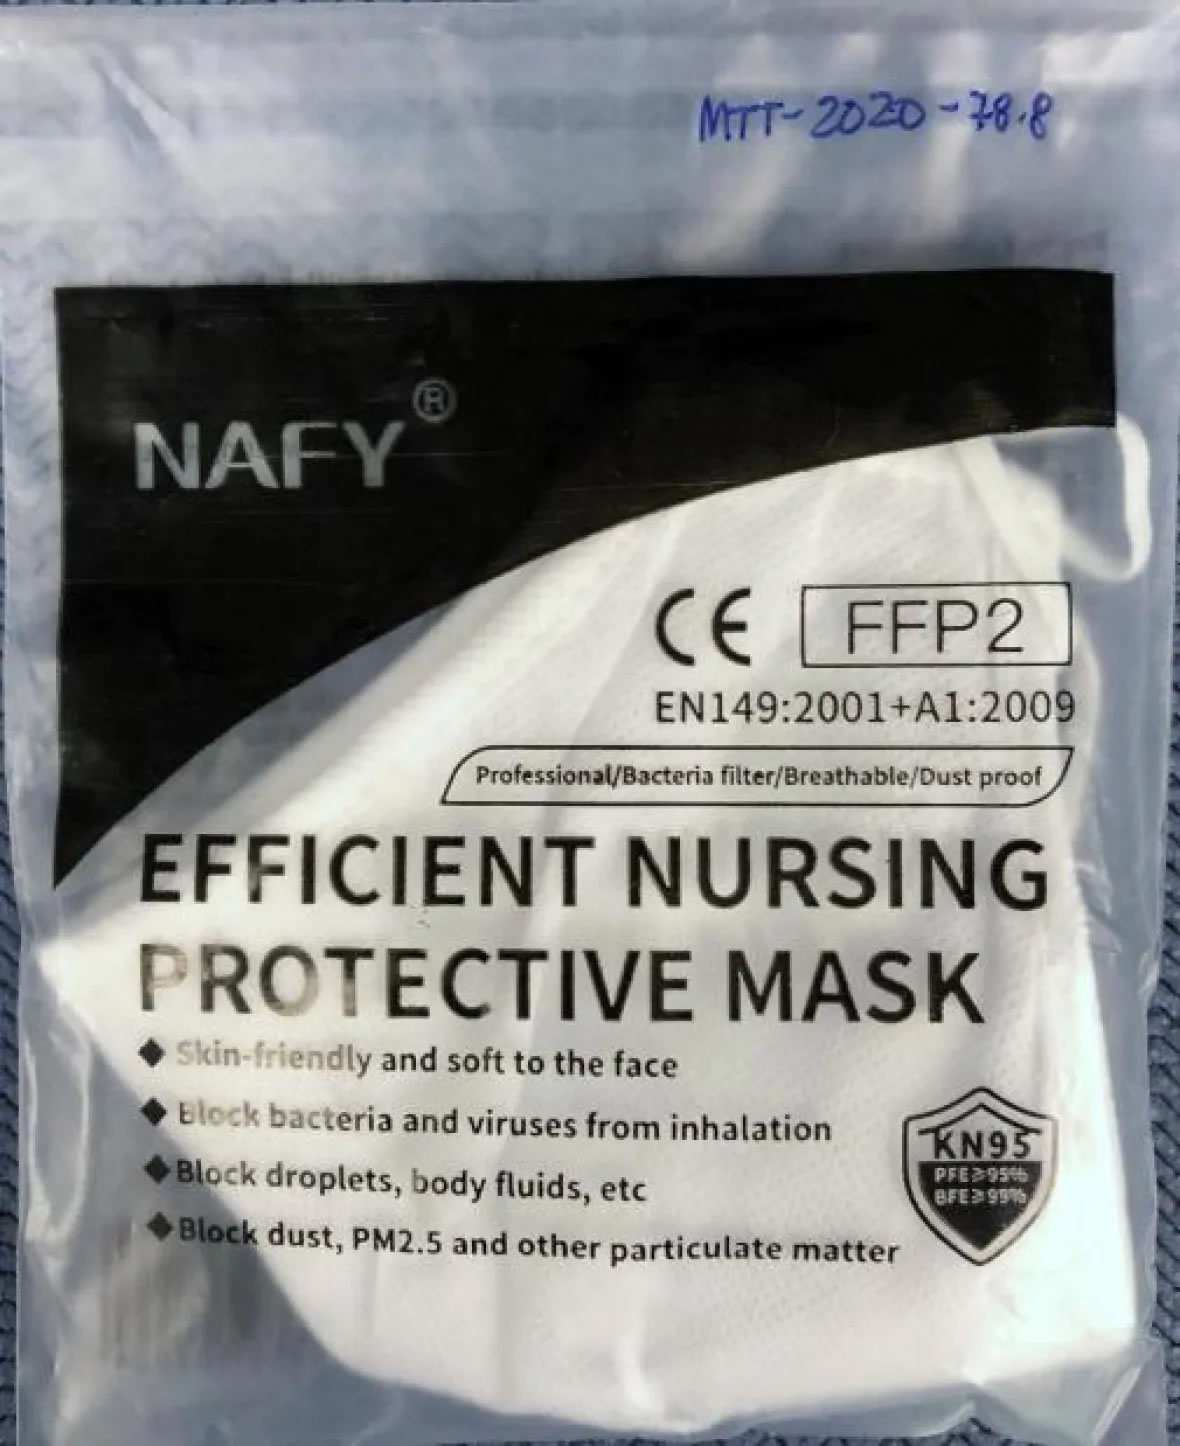 Recall of Some KN95 Masks Made in China by Health Canada Issues